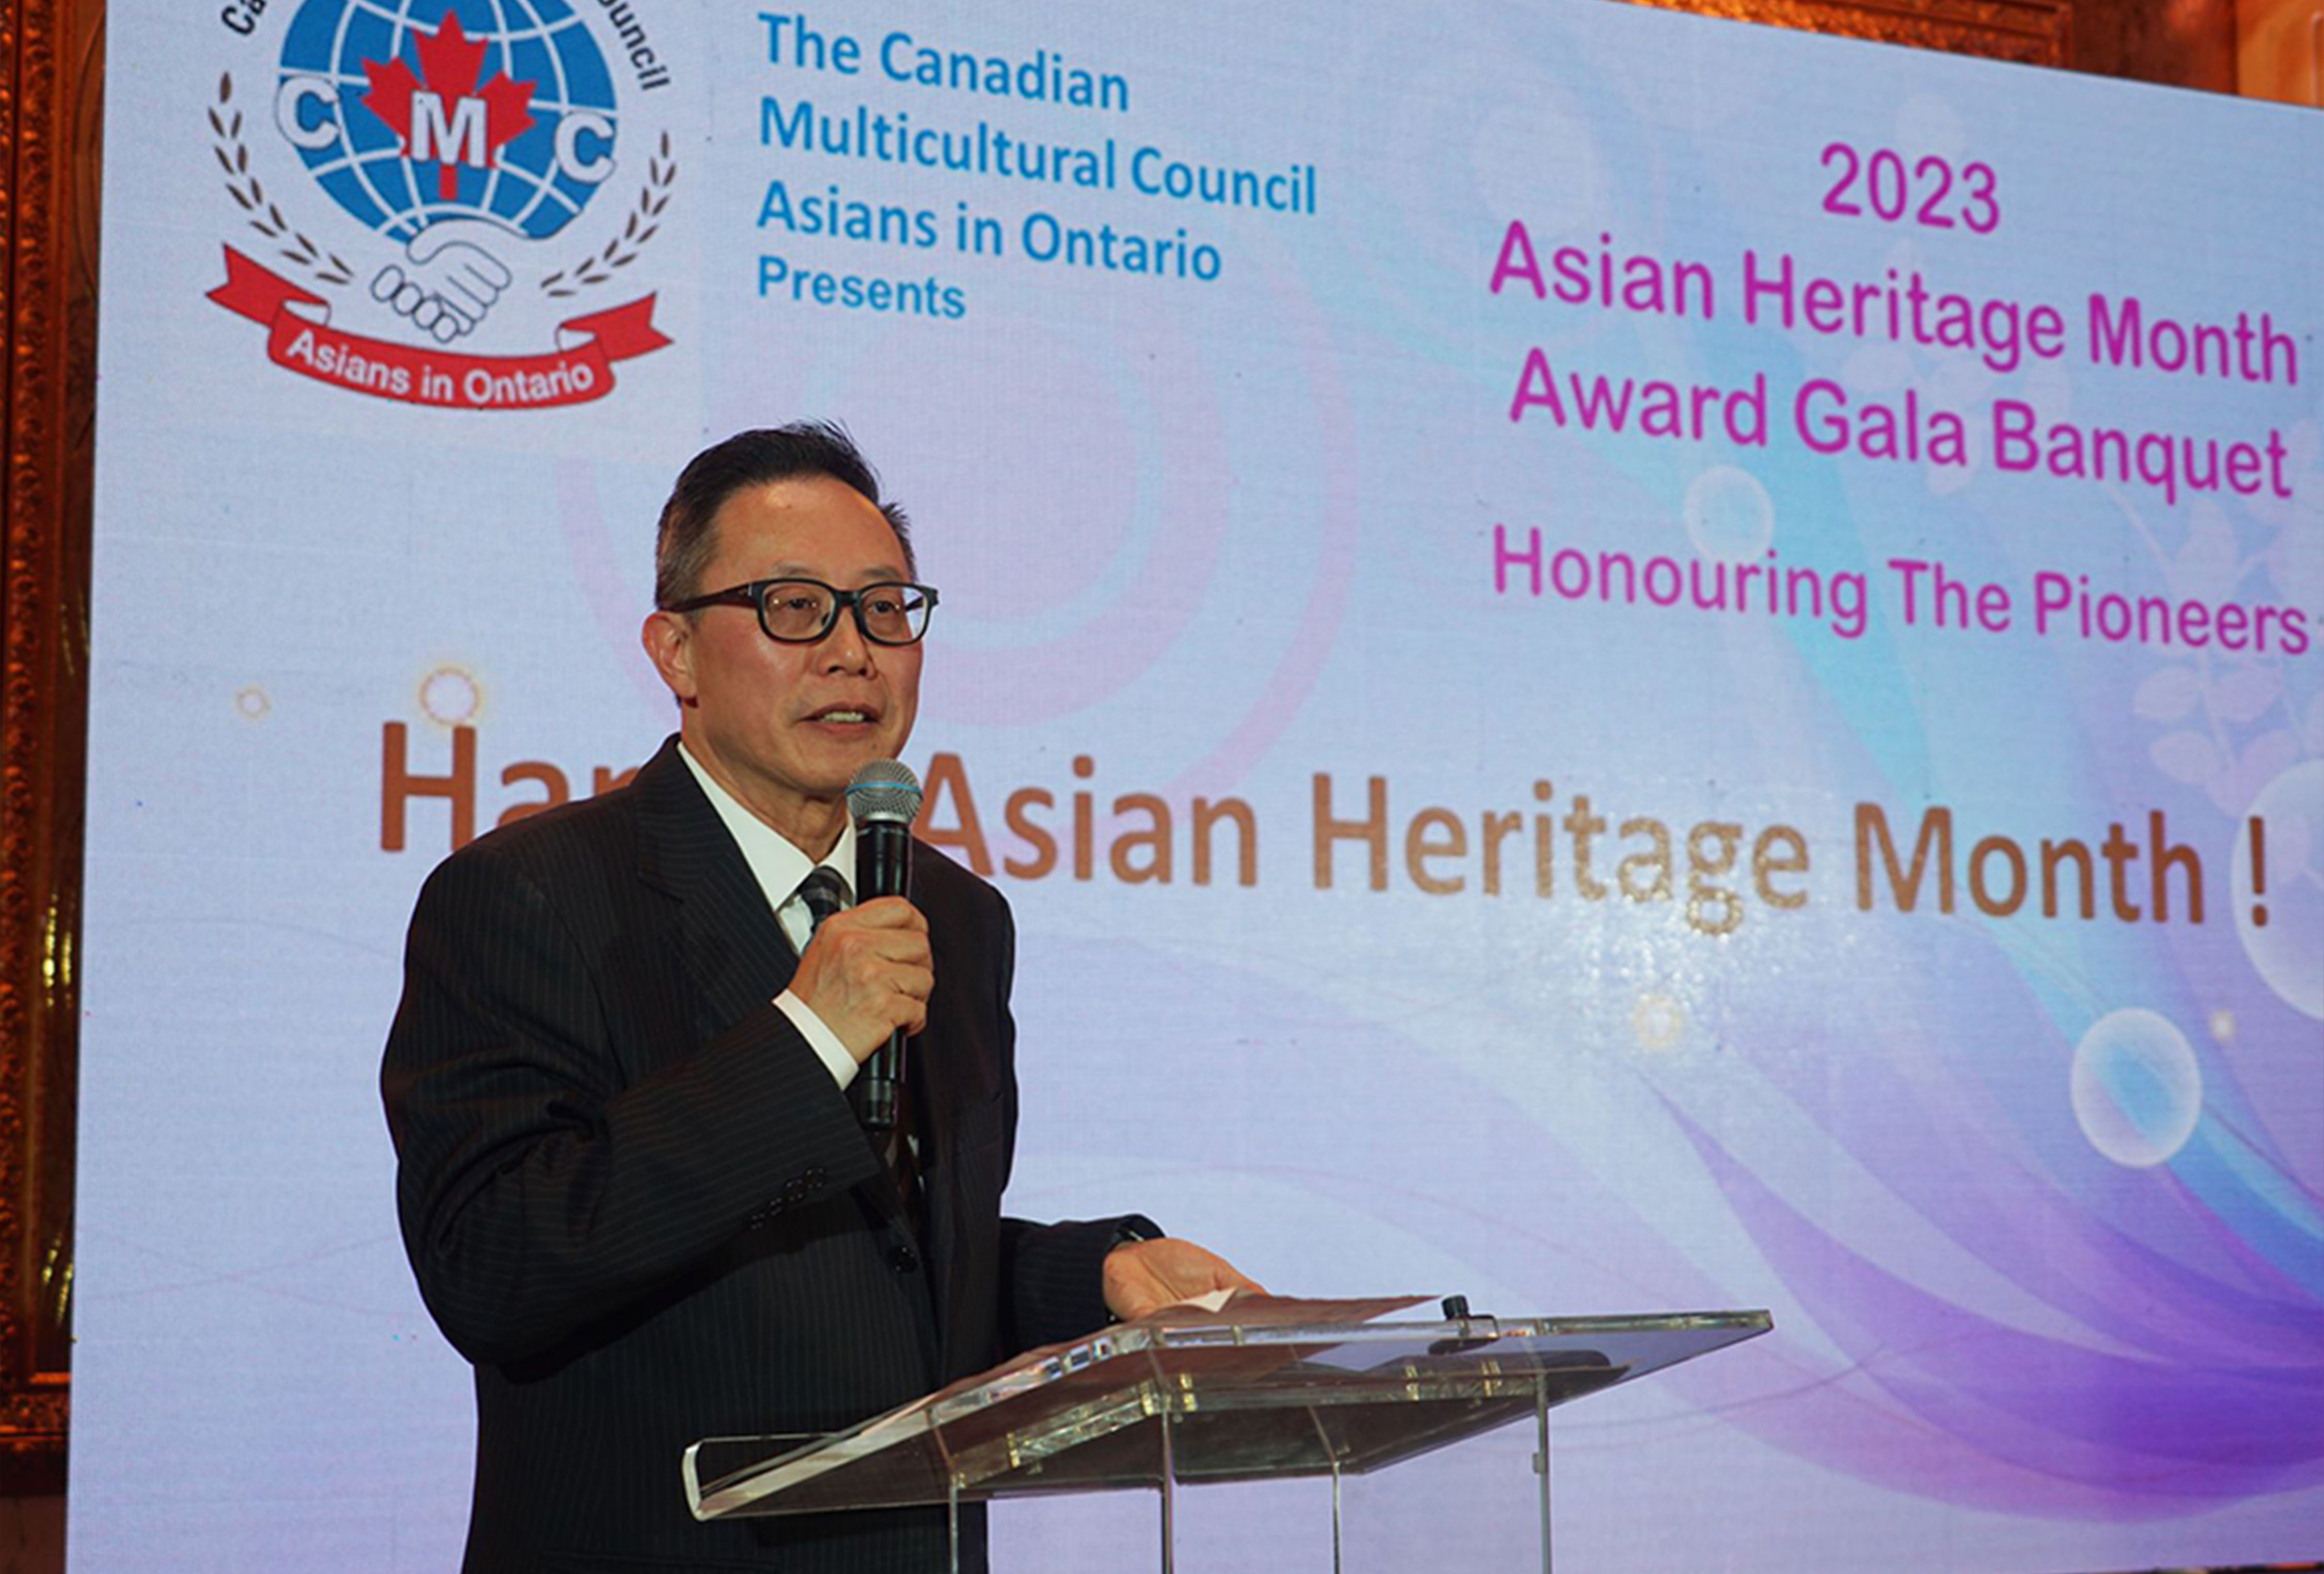 Yew-Thong Leong speaking at the 2023 Asian Heritage Month Award Gala Banquet. 